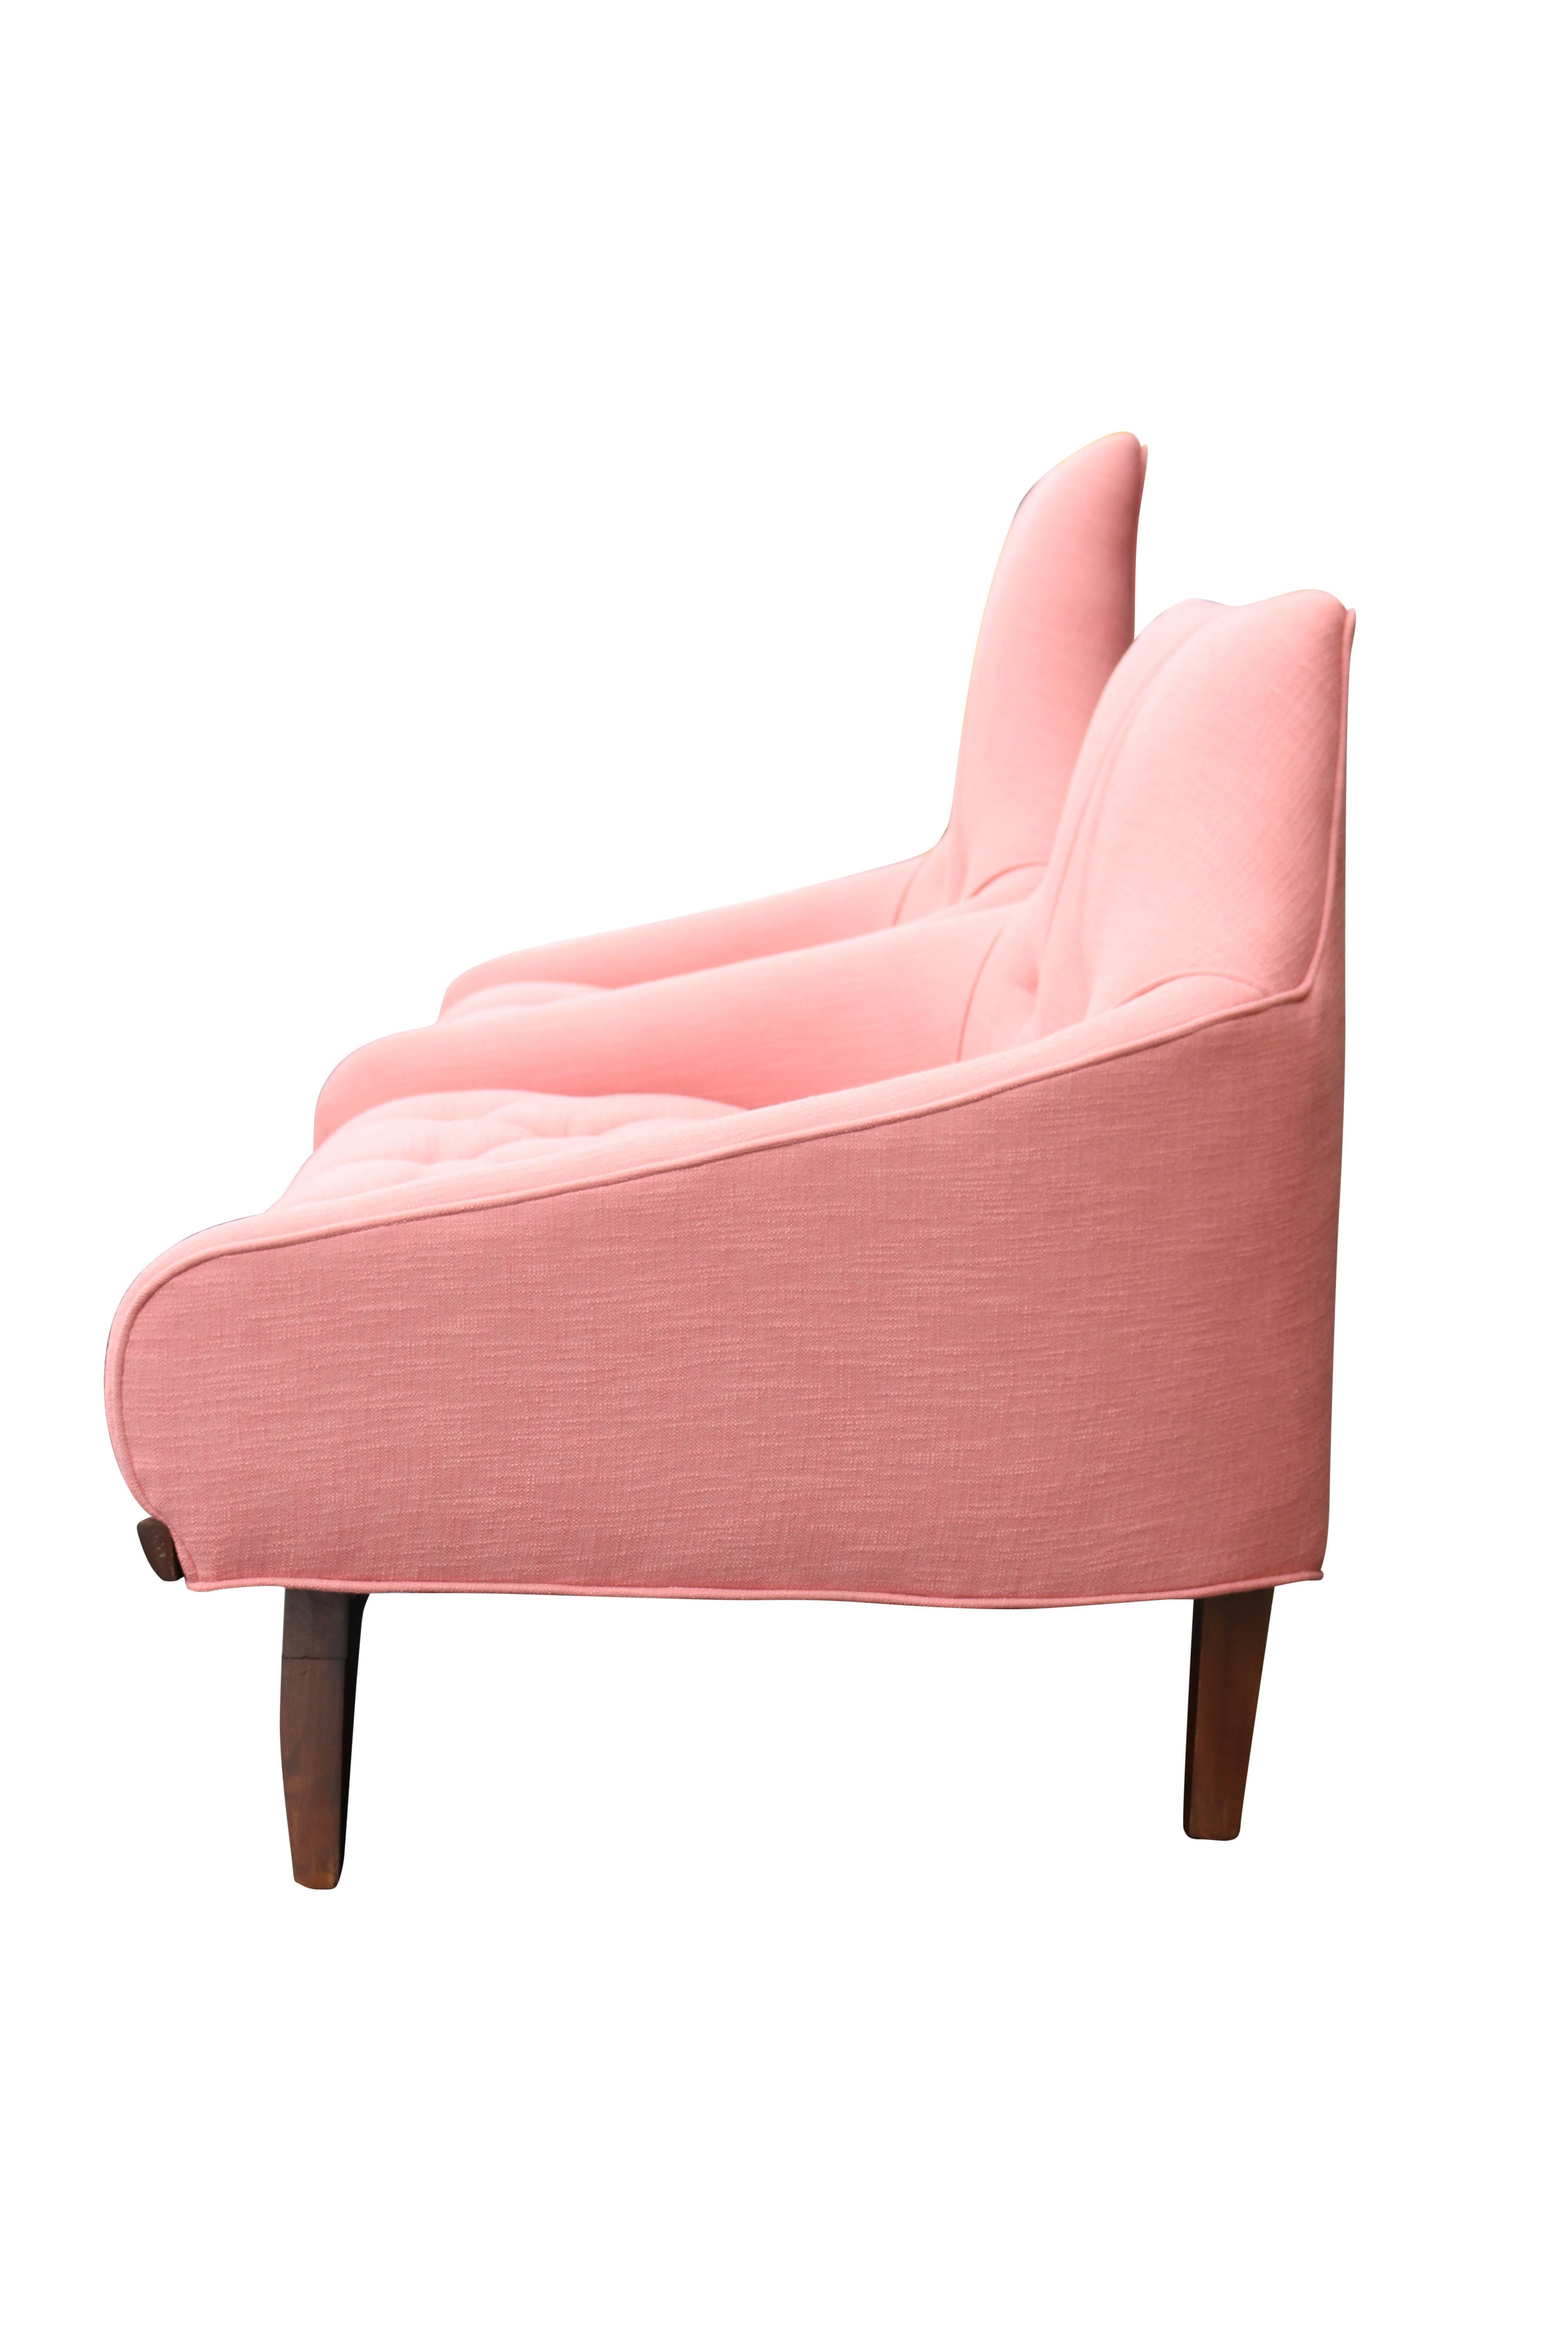 American Pair of Mid-Century Modern Pink Linen and Walnut Gondola Chairs